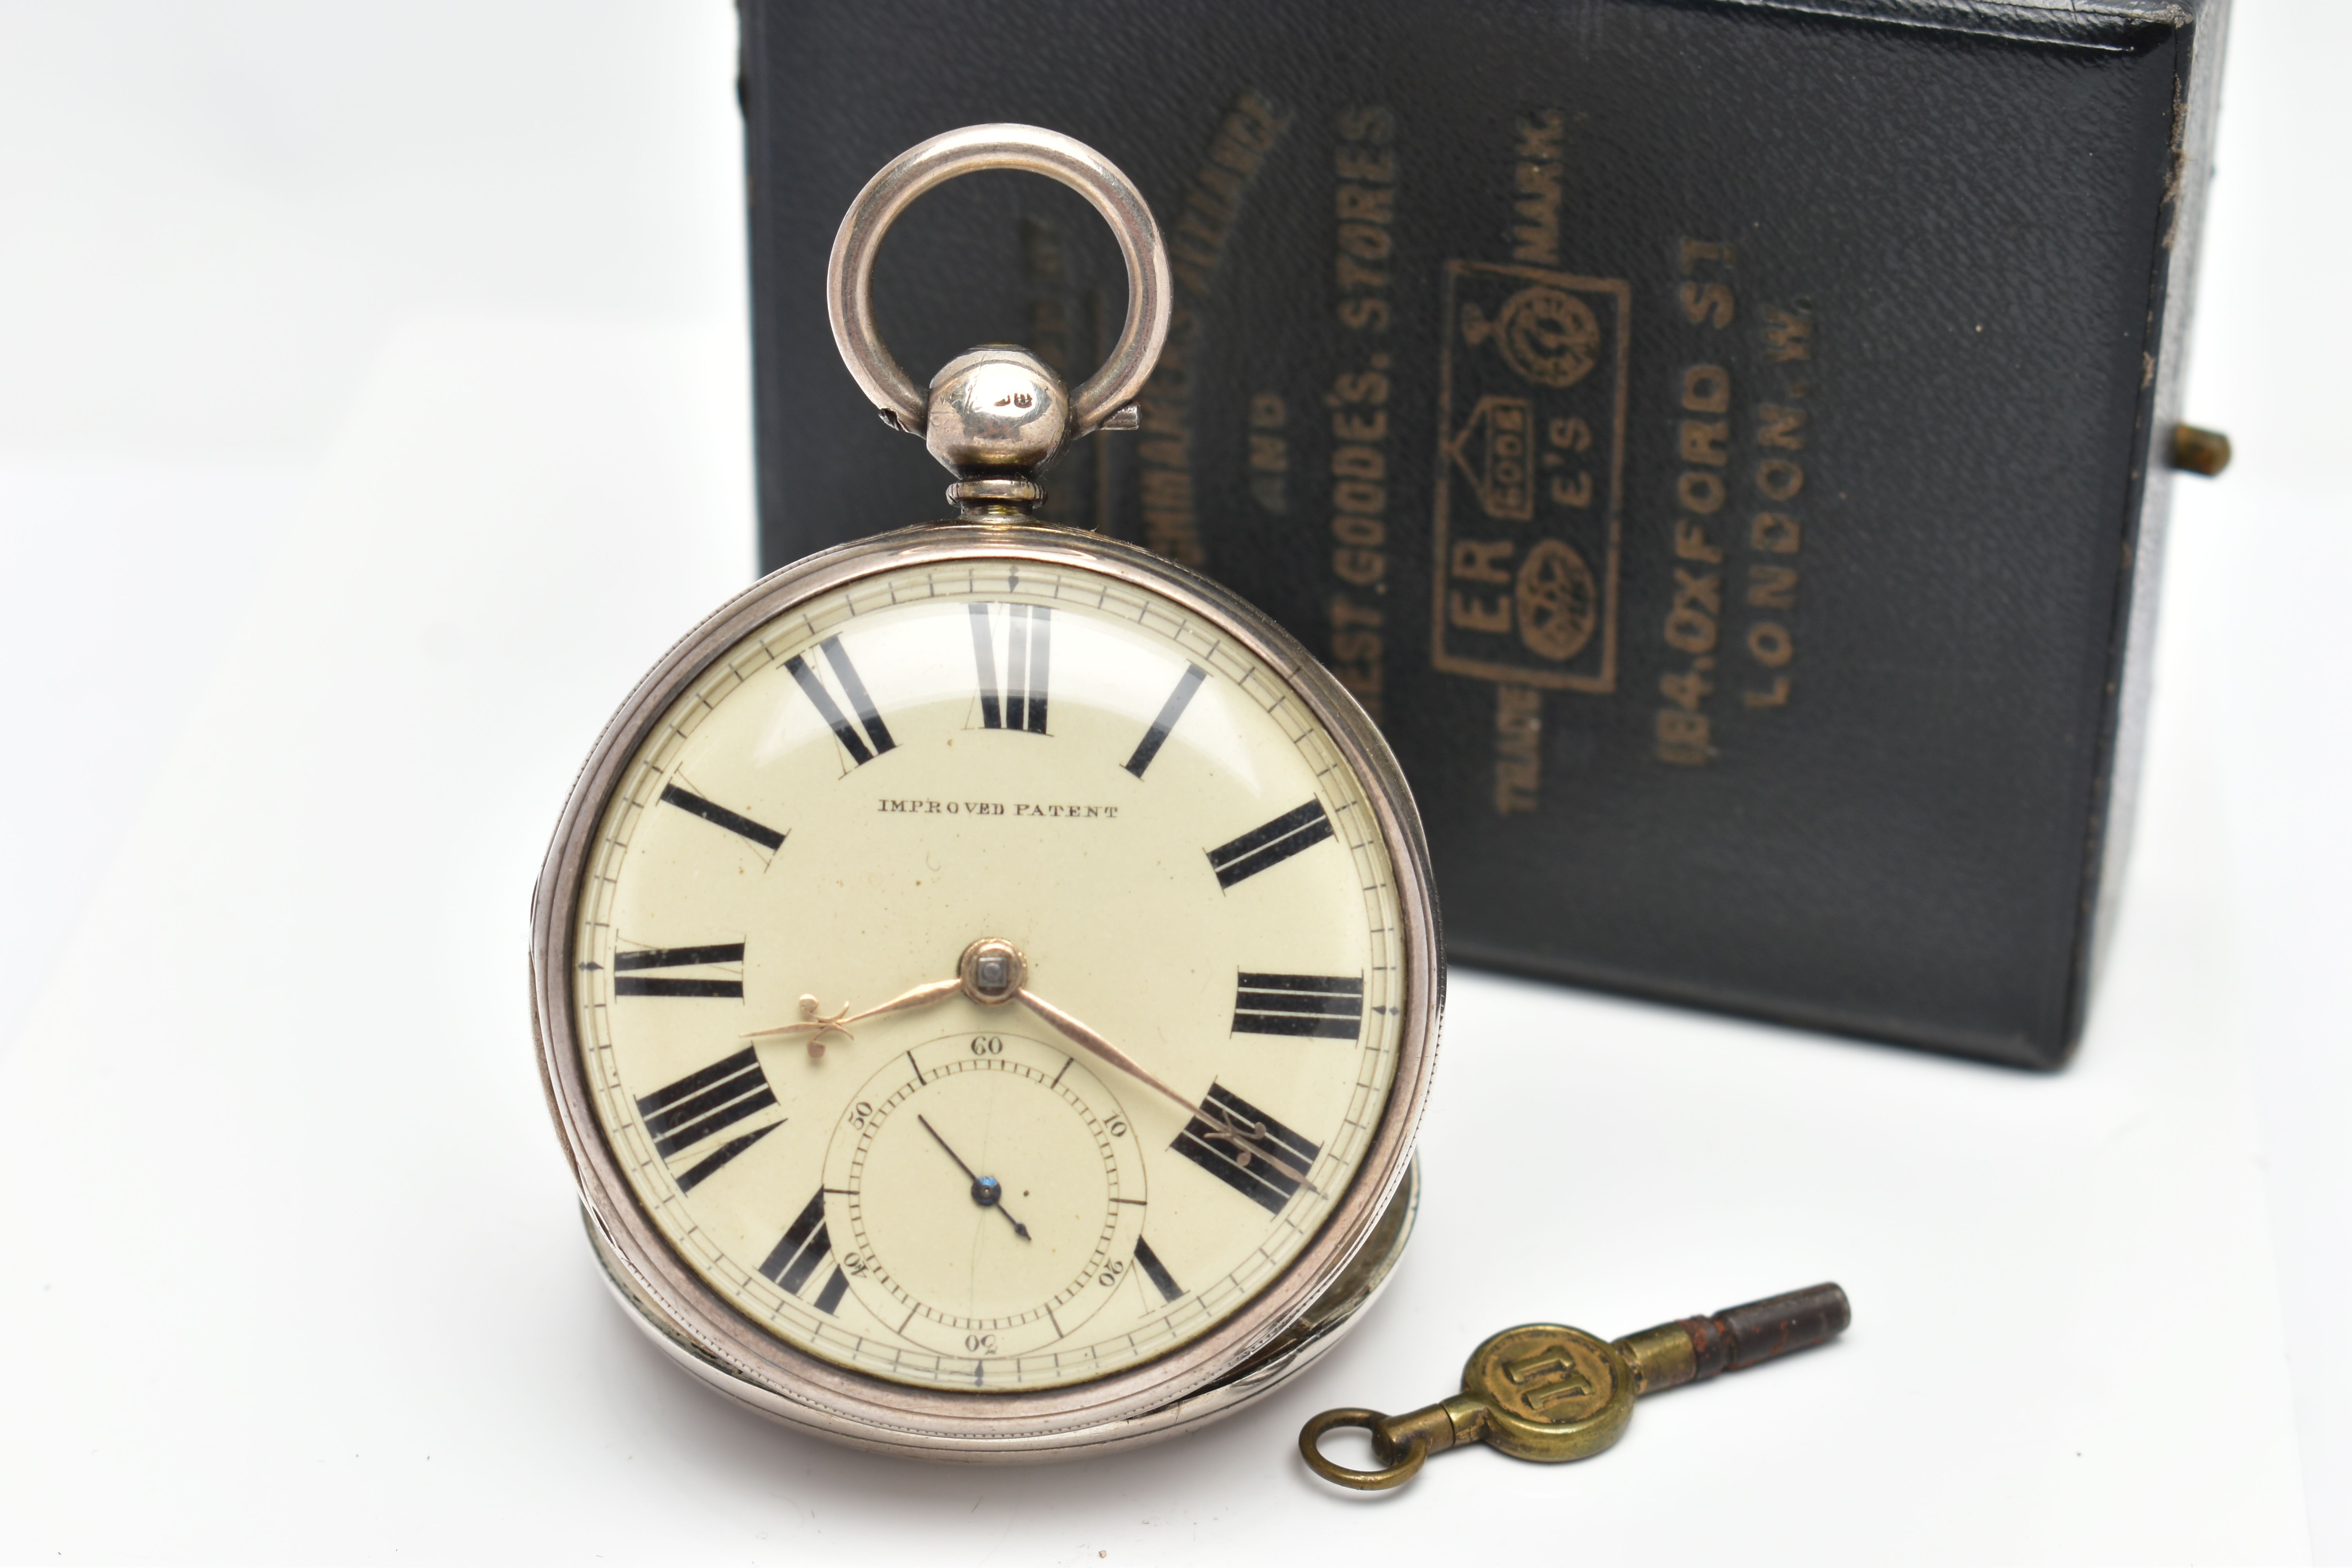 A CASED SILVER OPEN FACE POCKET WATCH, key wound, round cream dial signed 'Improved Patent', large